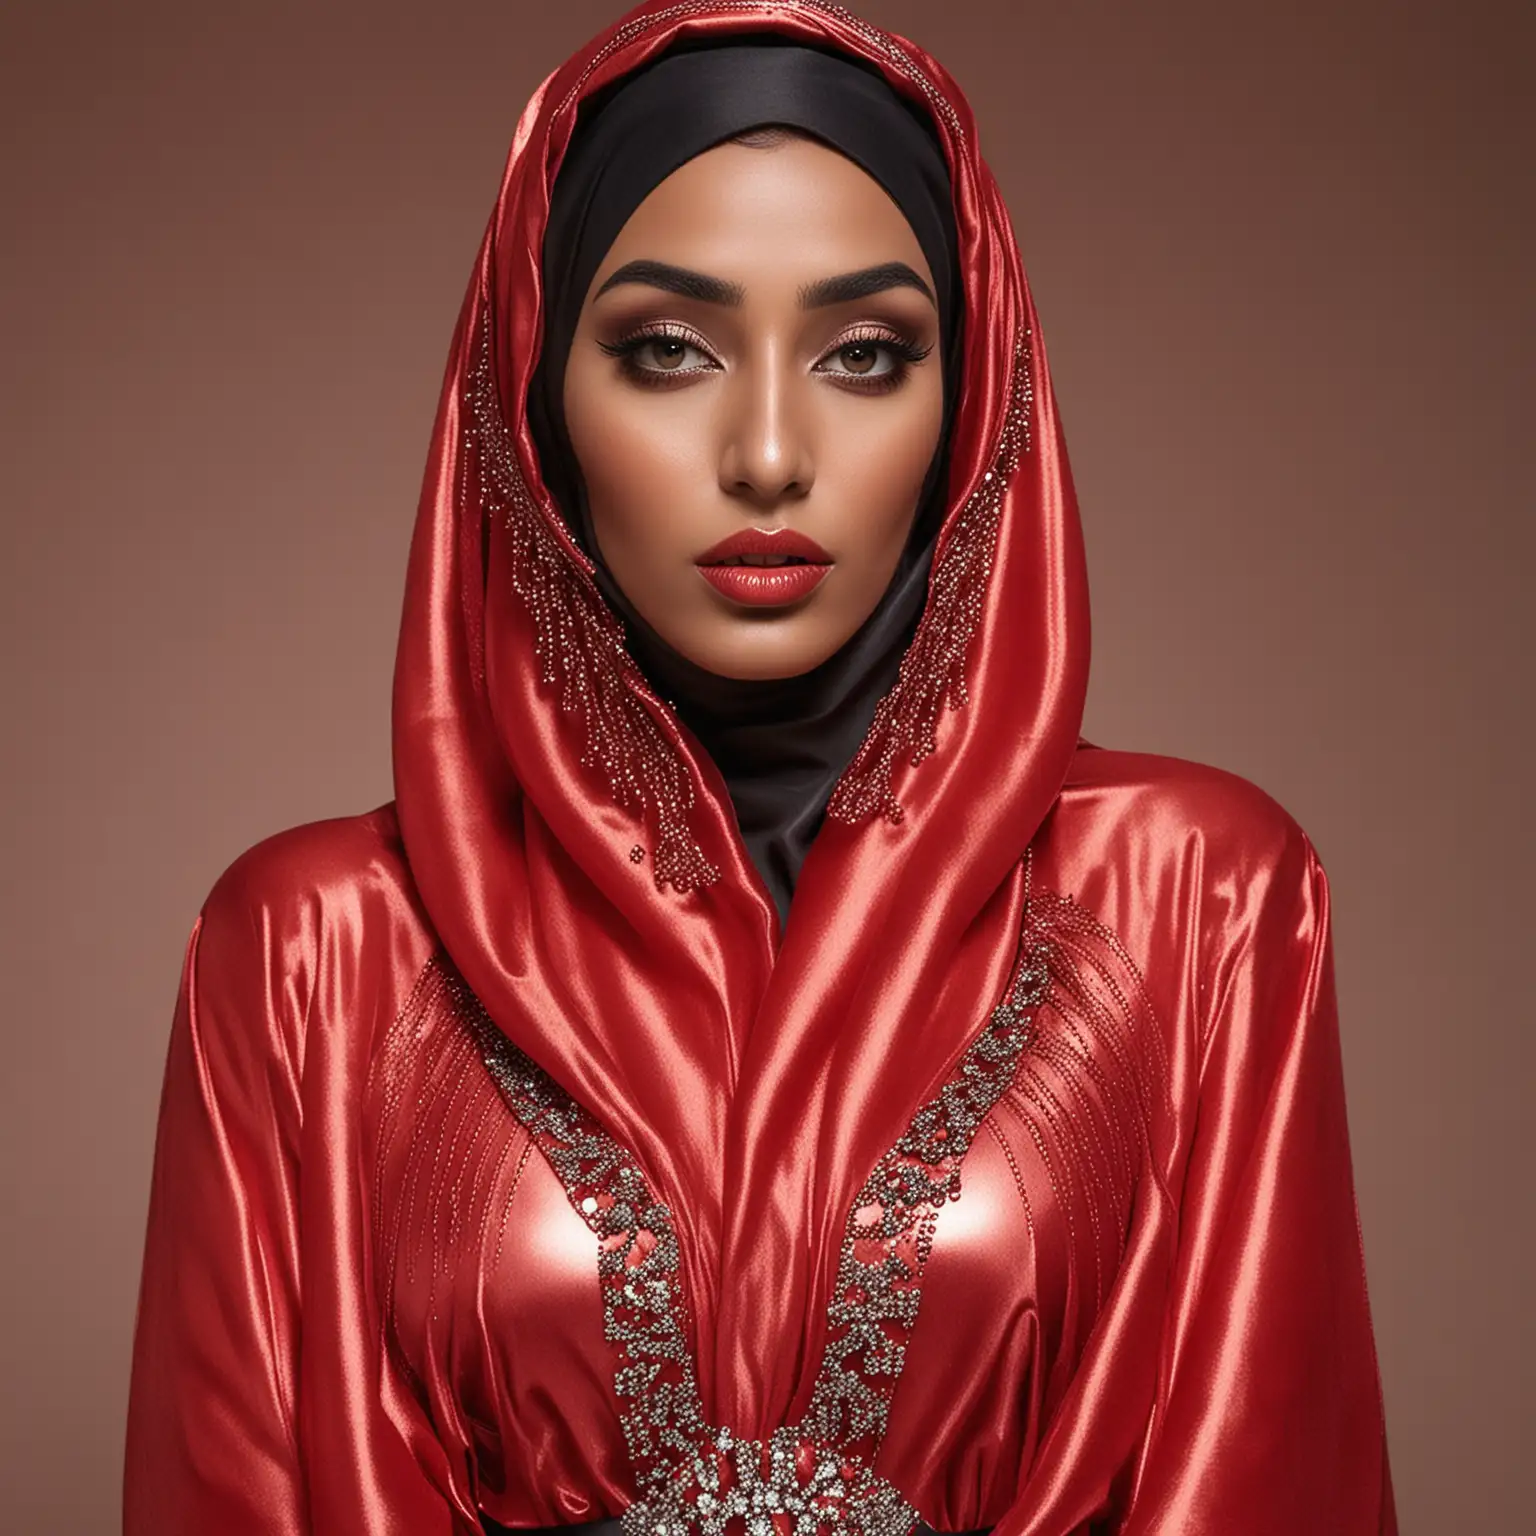 Niqabi Arab Muslimah in heavy makeup wearing a red shiny metallic silk chiffon hijab and expensive kaftan. The metallic niqab’s long, loose, drapey fabric hides her face and she’s wearing 5” Louboutin patent leather heels 